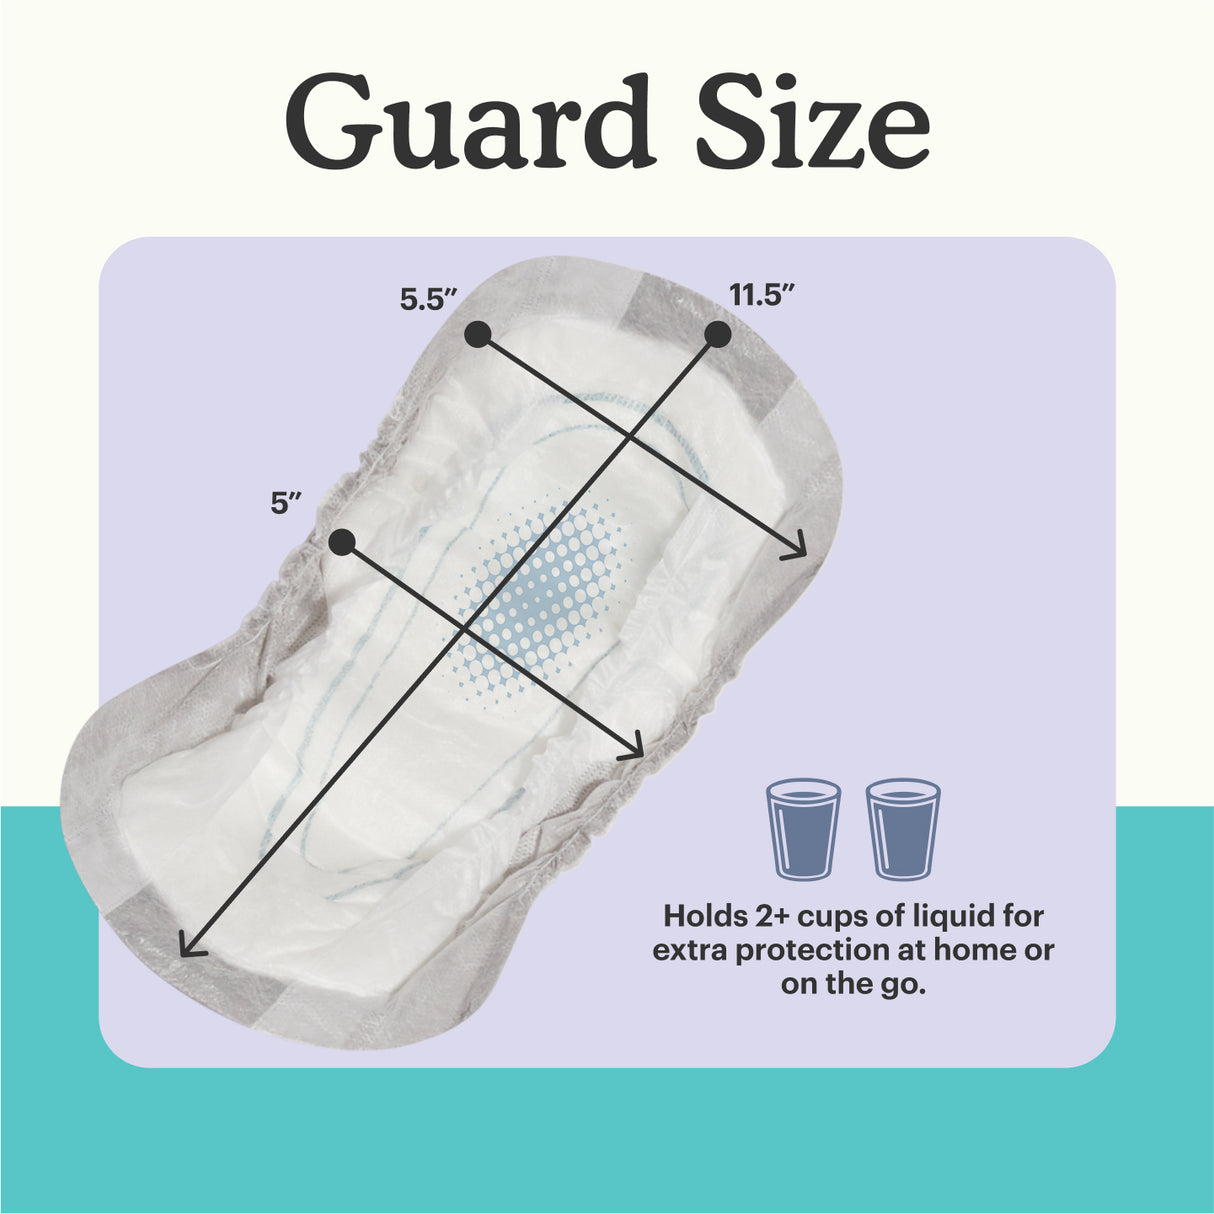 Guard size. Holds 2+ cups of liquid for extra protection at home or on the go.